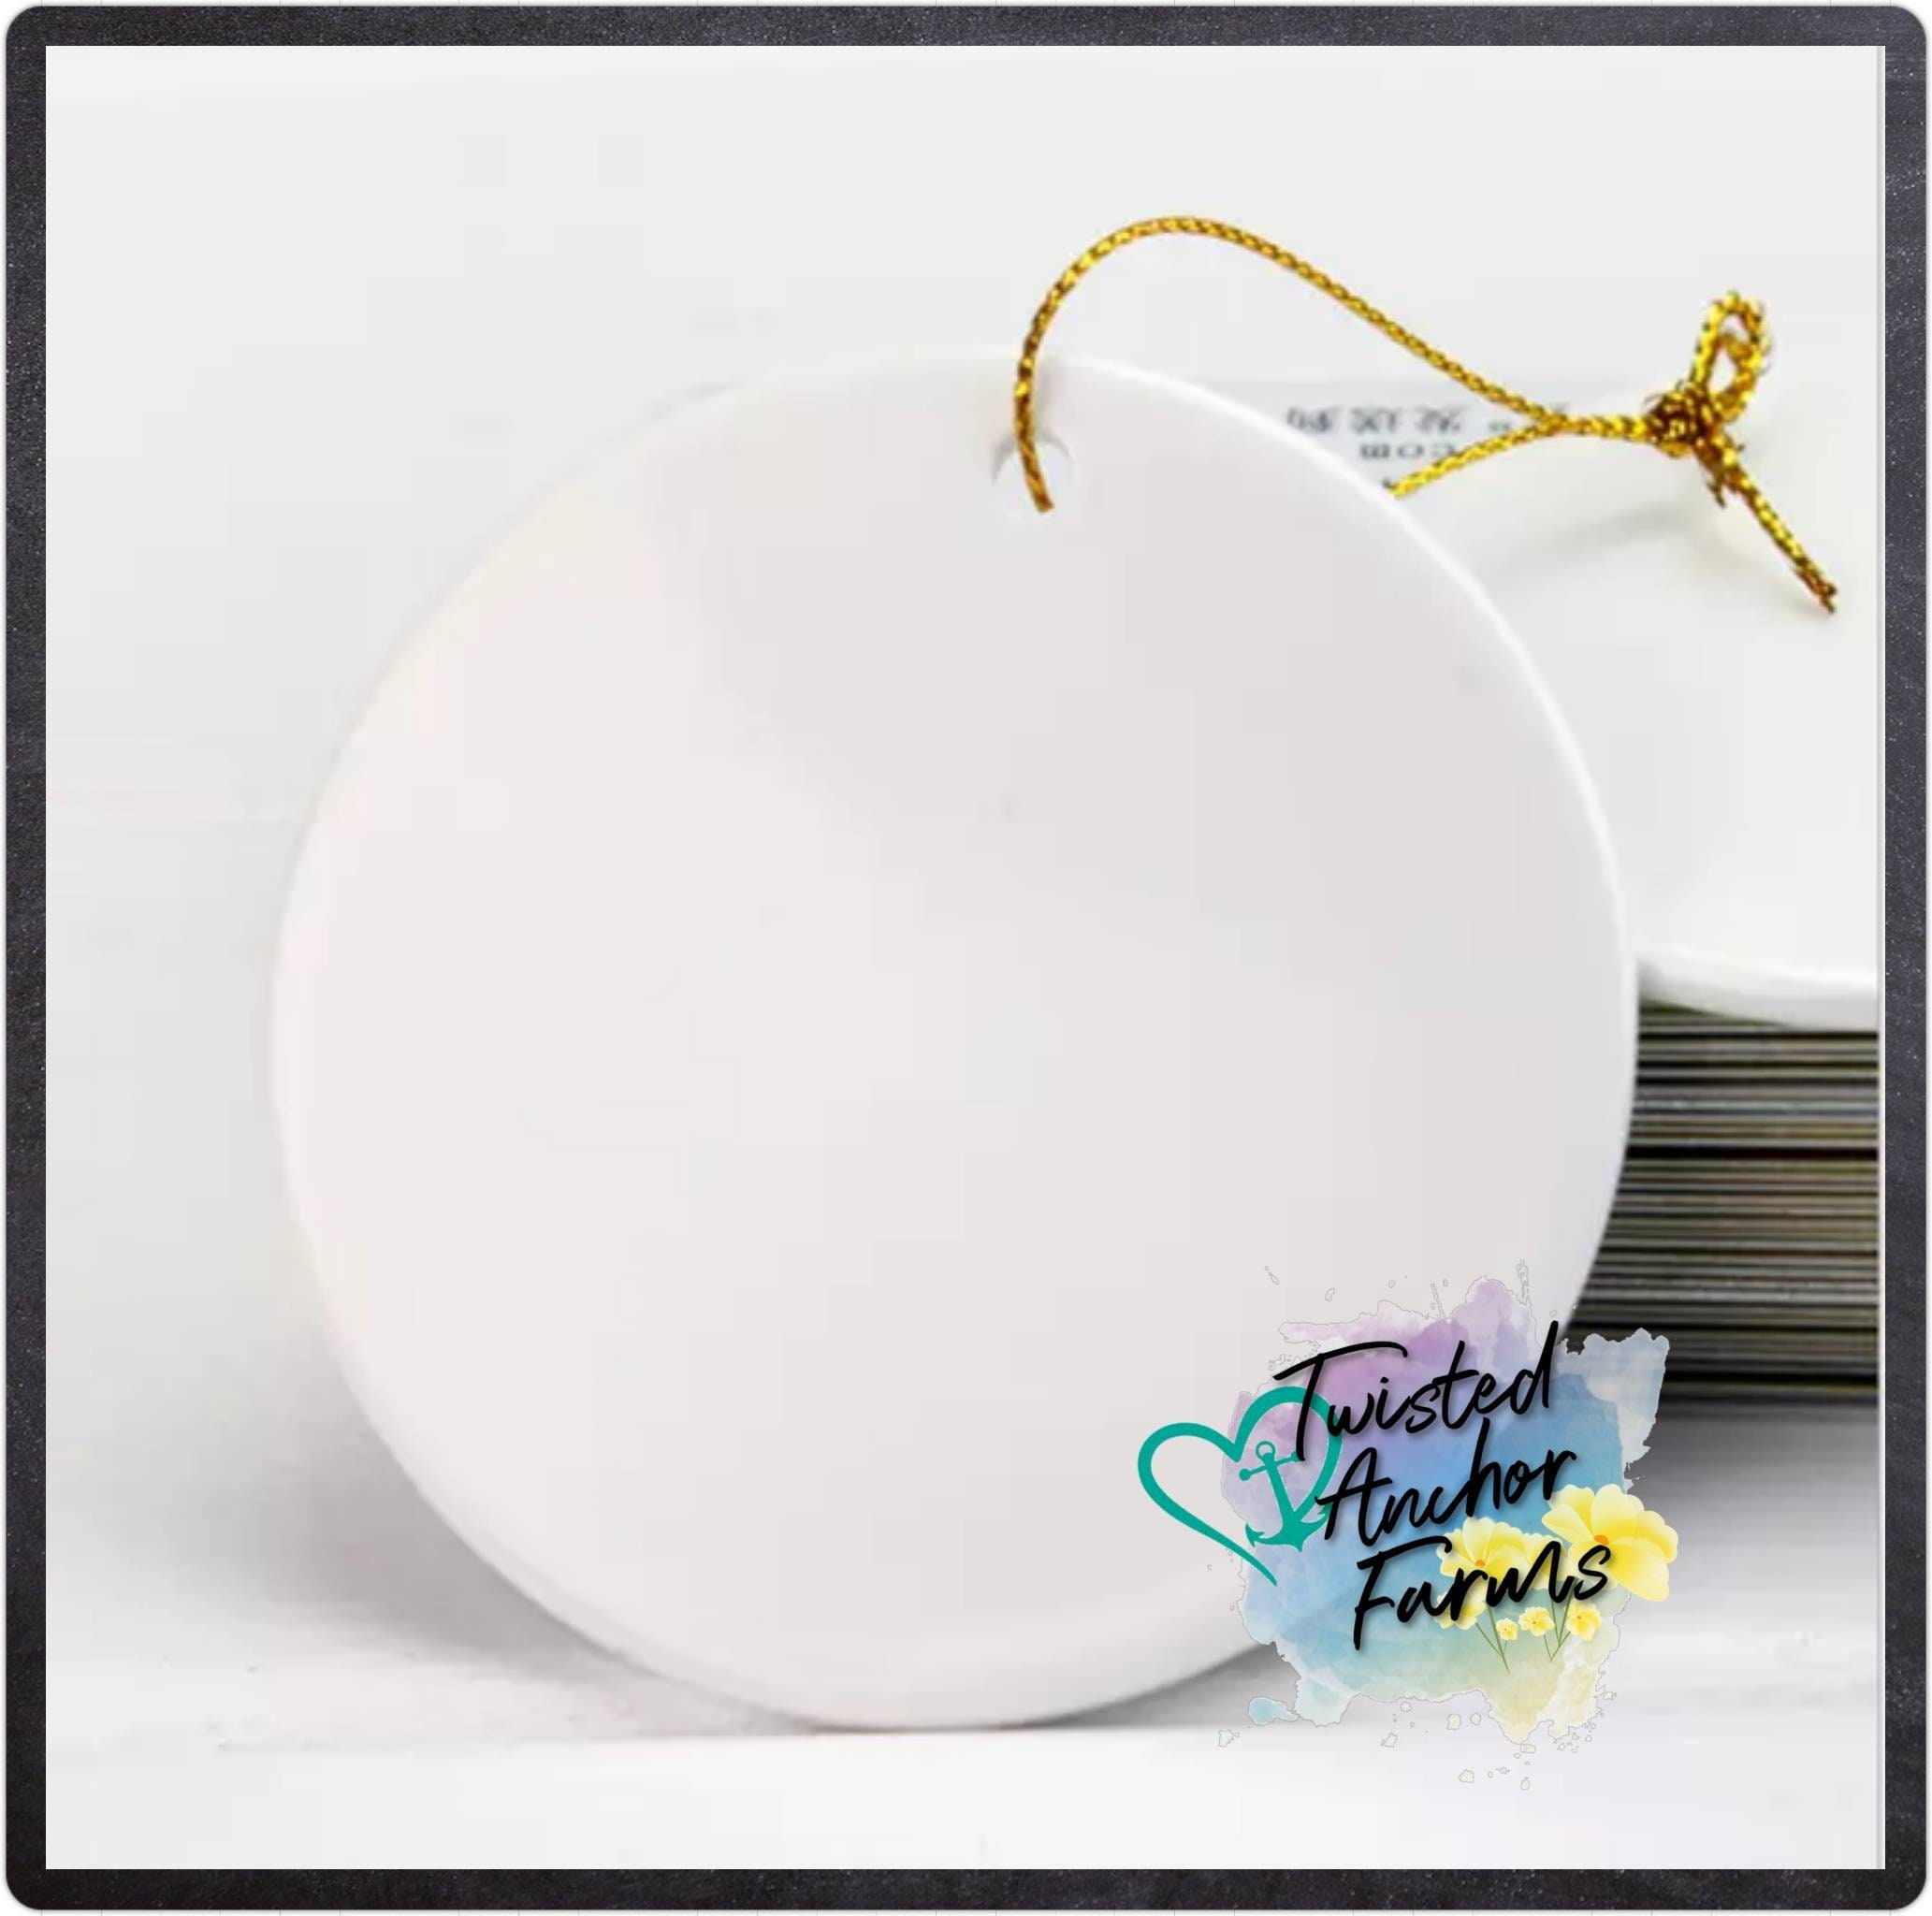 Double Sided 3 Blank Ceramic Sublimation Ornament, Sublimation